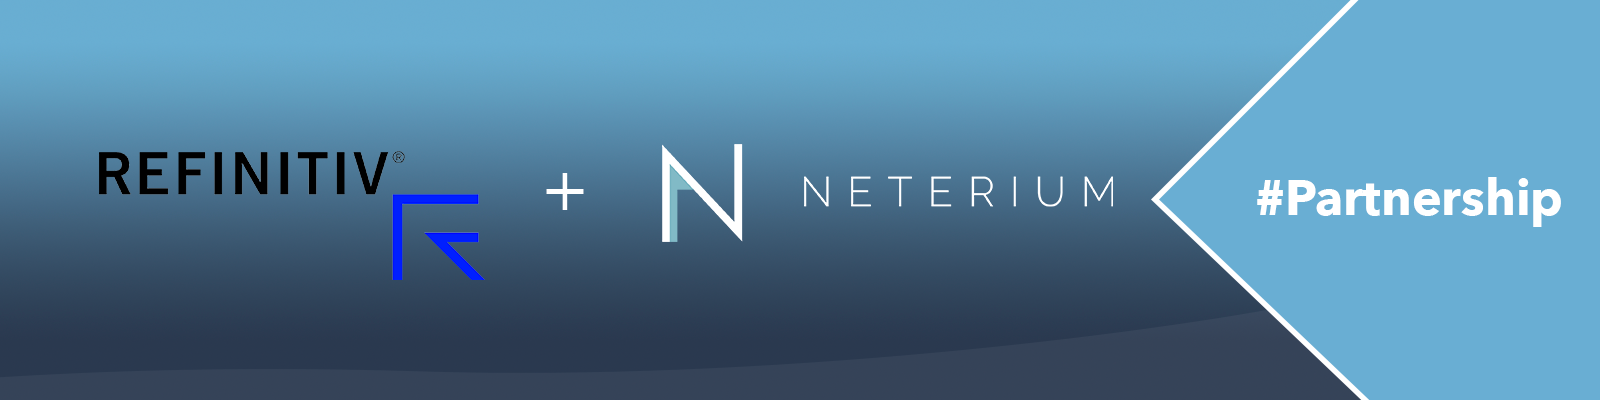 Neterium is proud of hosting and managing the Refinitiv, an LSEG business